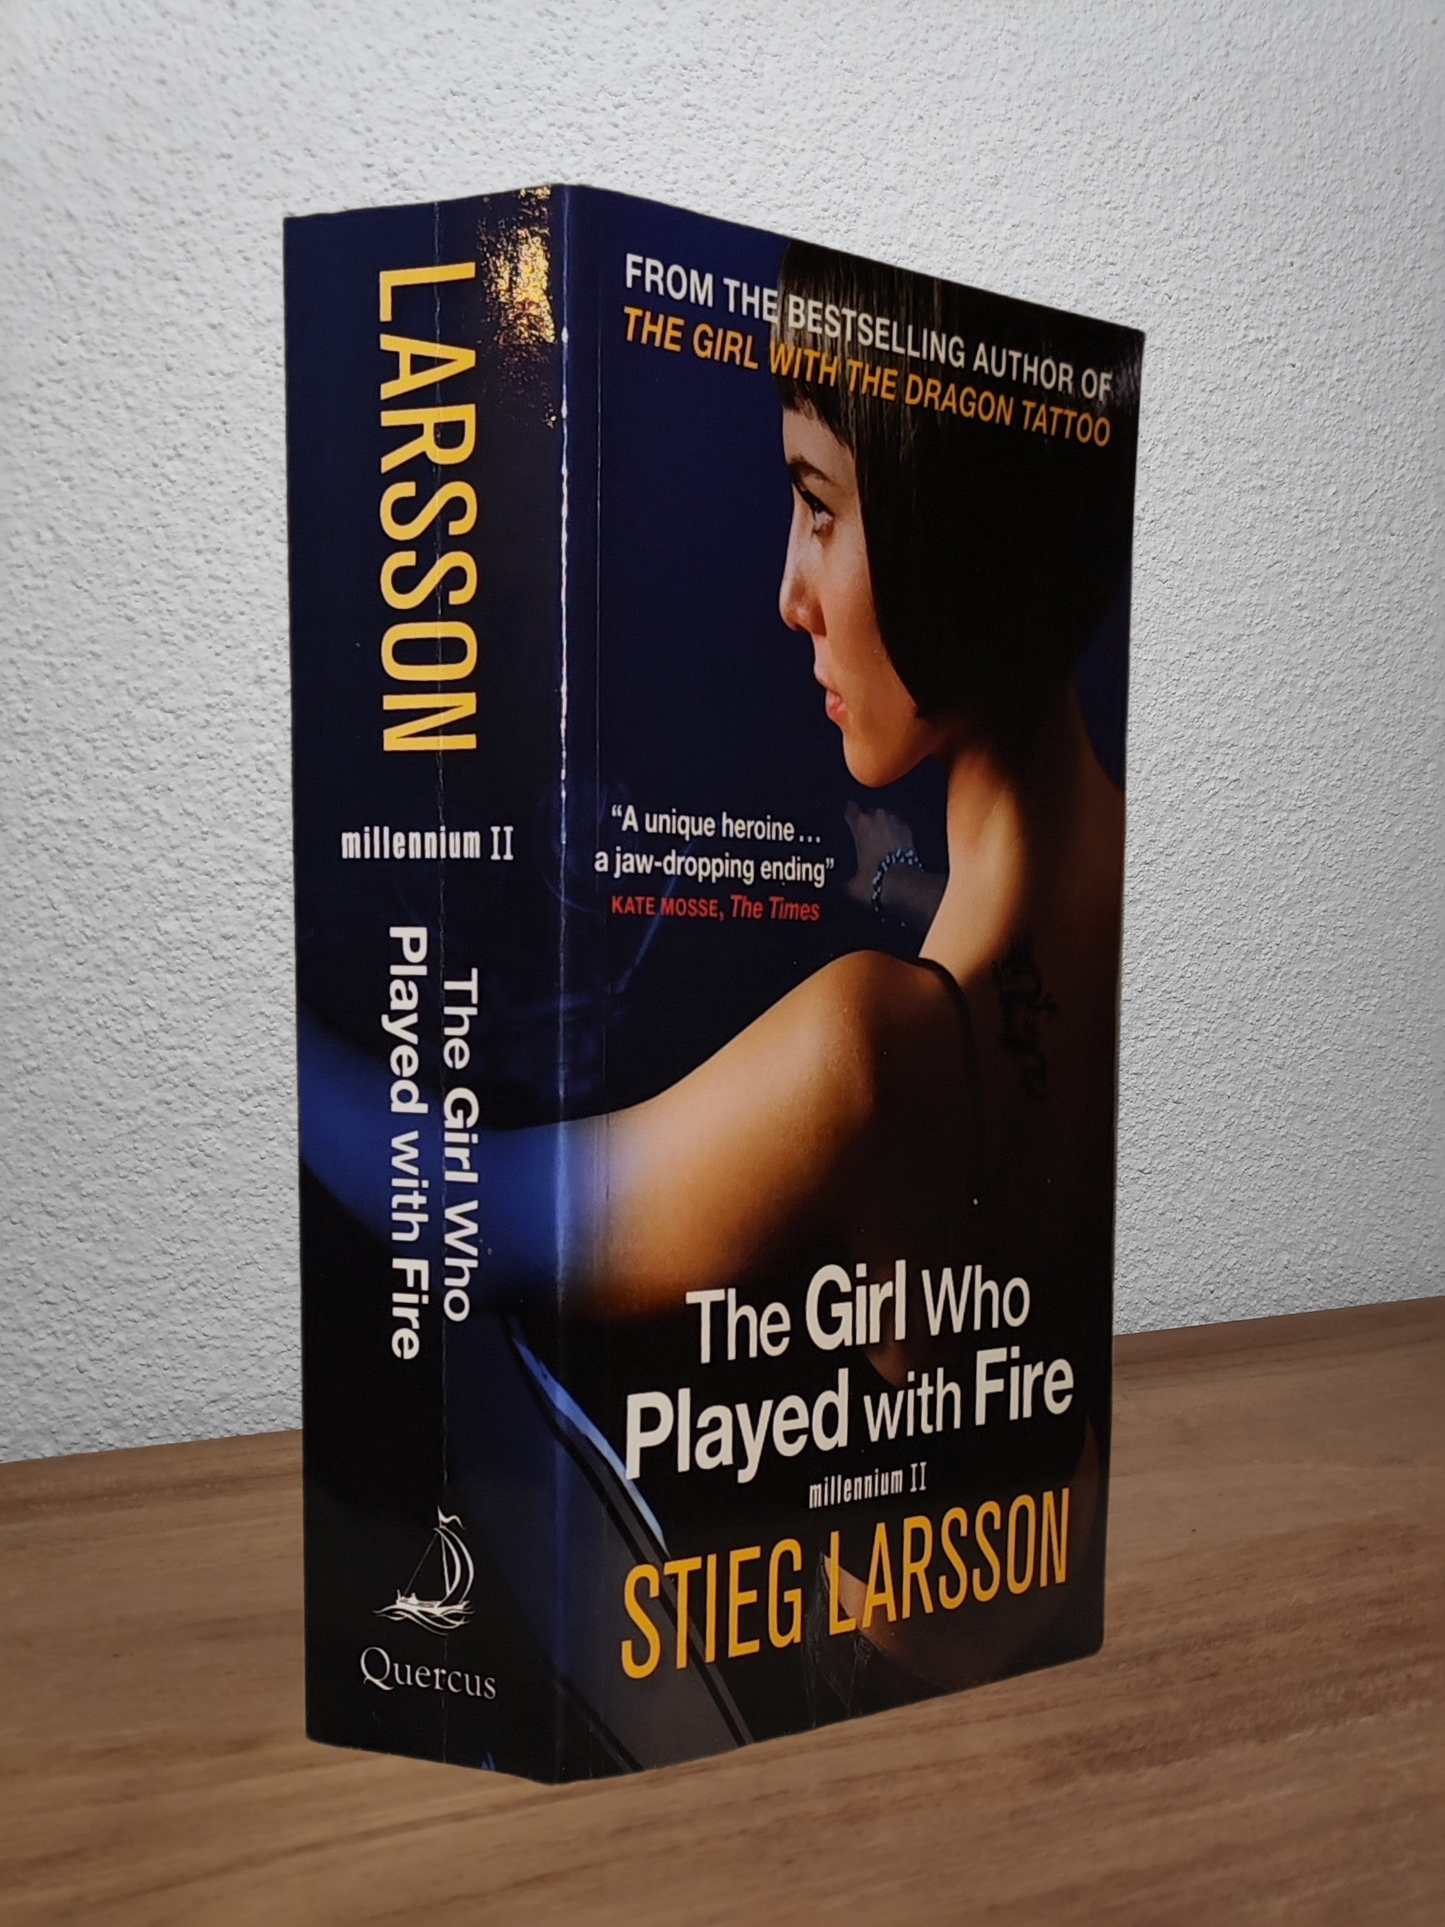 Stieg Larsson - The Girl Who Played with Fire (Millenium #2)